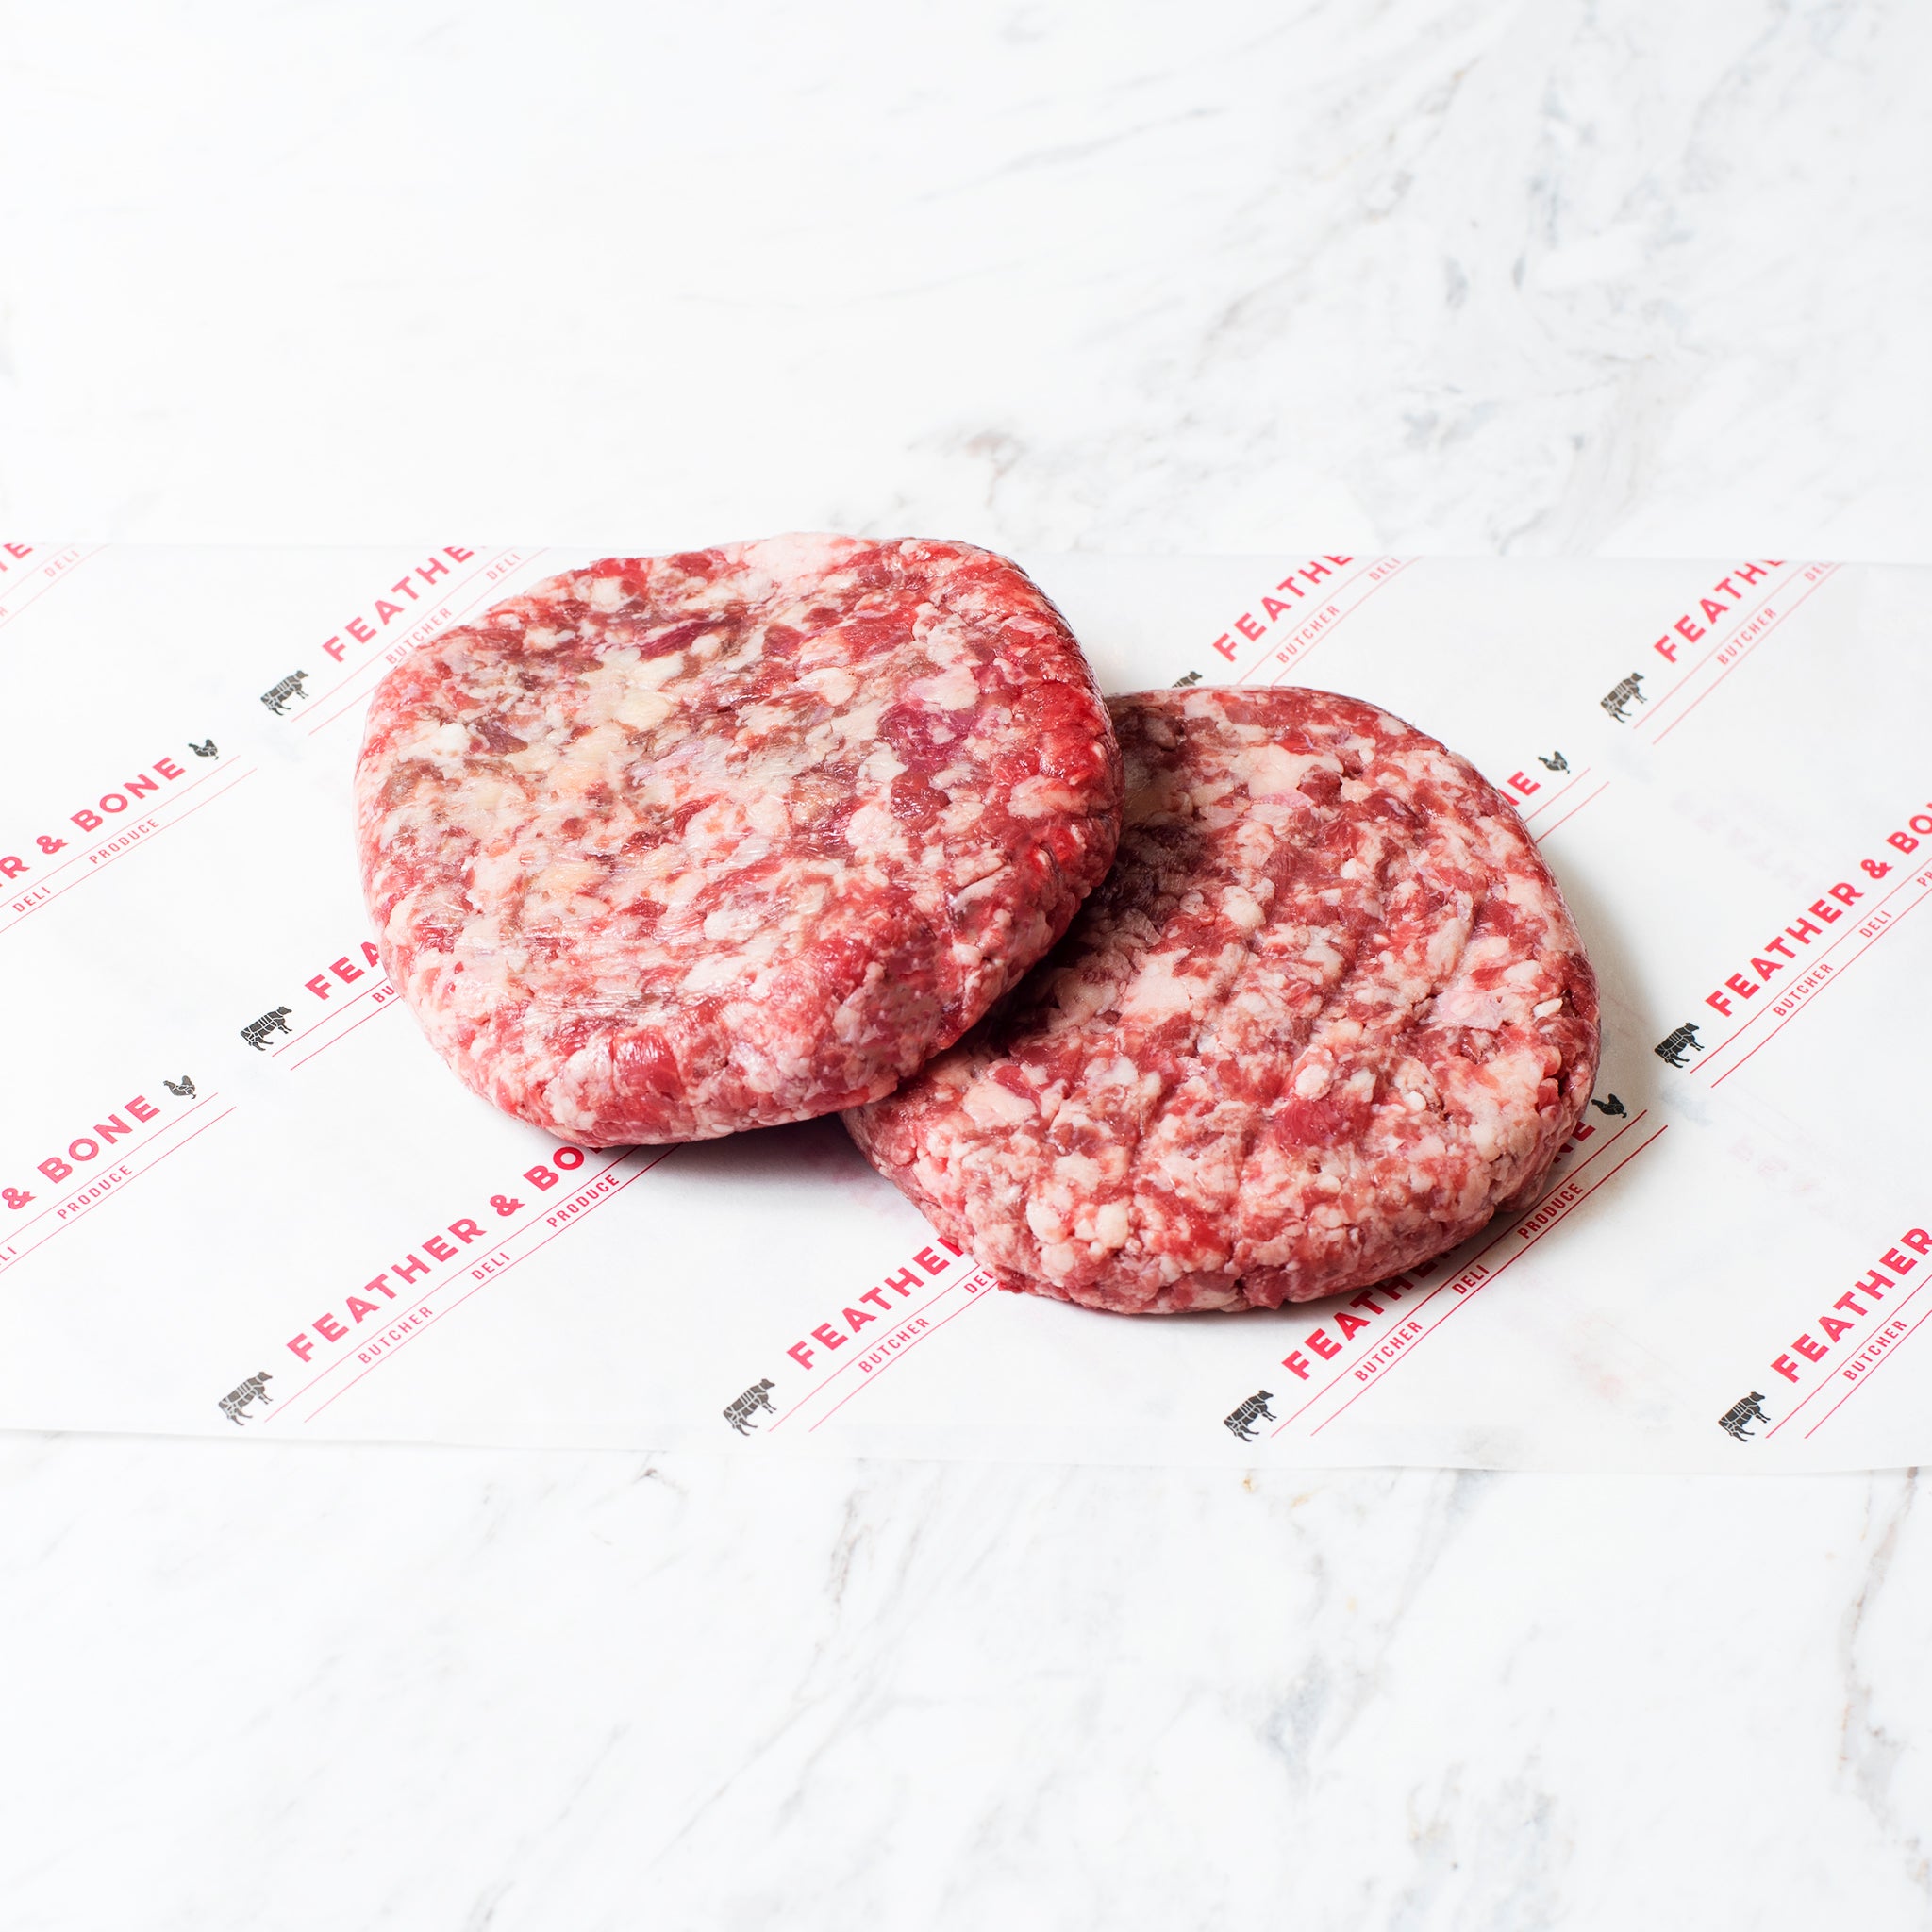 Two 200g Wagyu Beef Patties on Feather & Bone branded butchers paper.